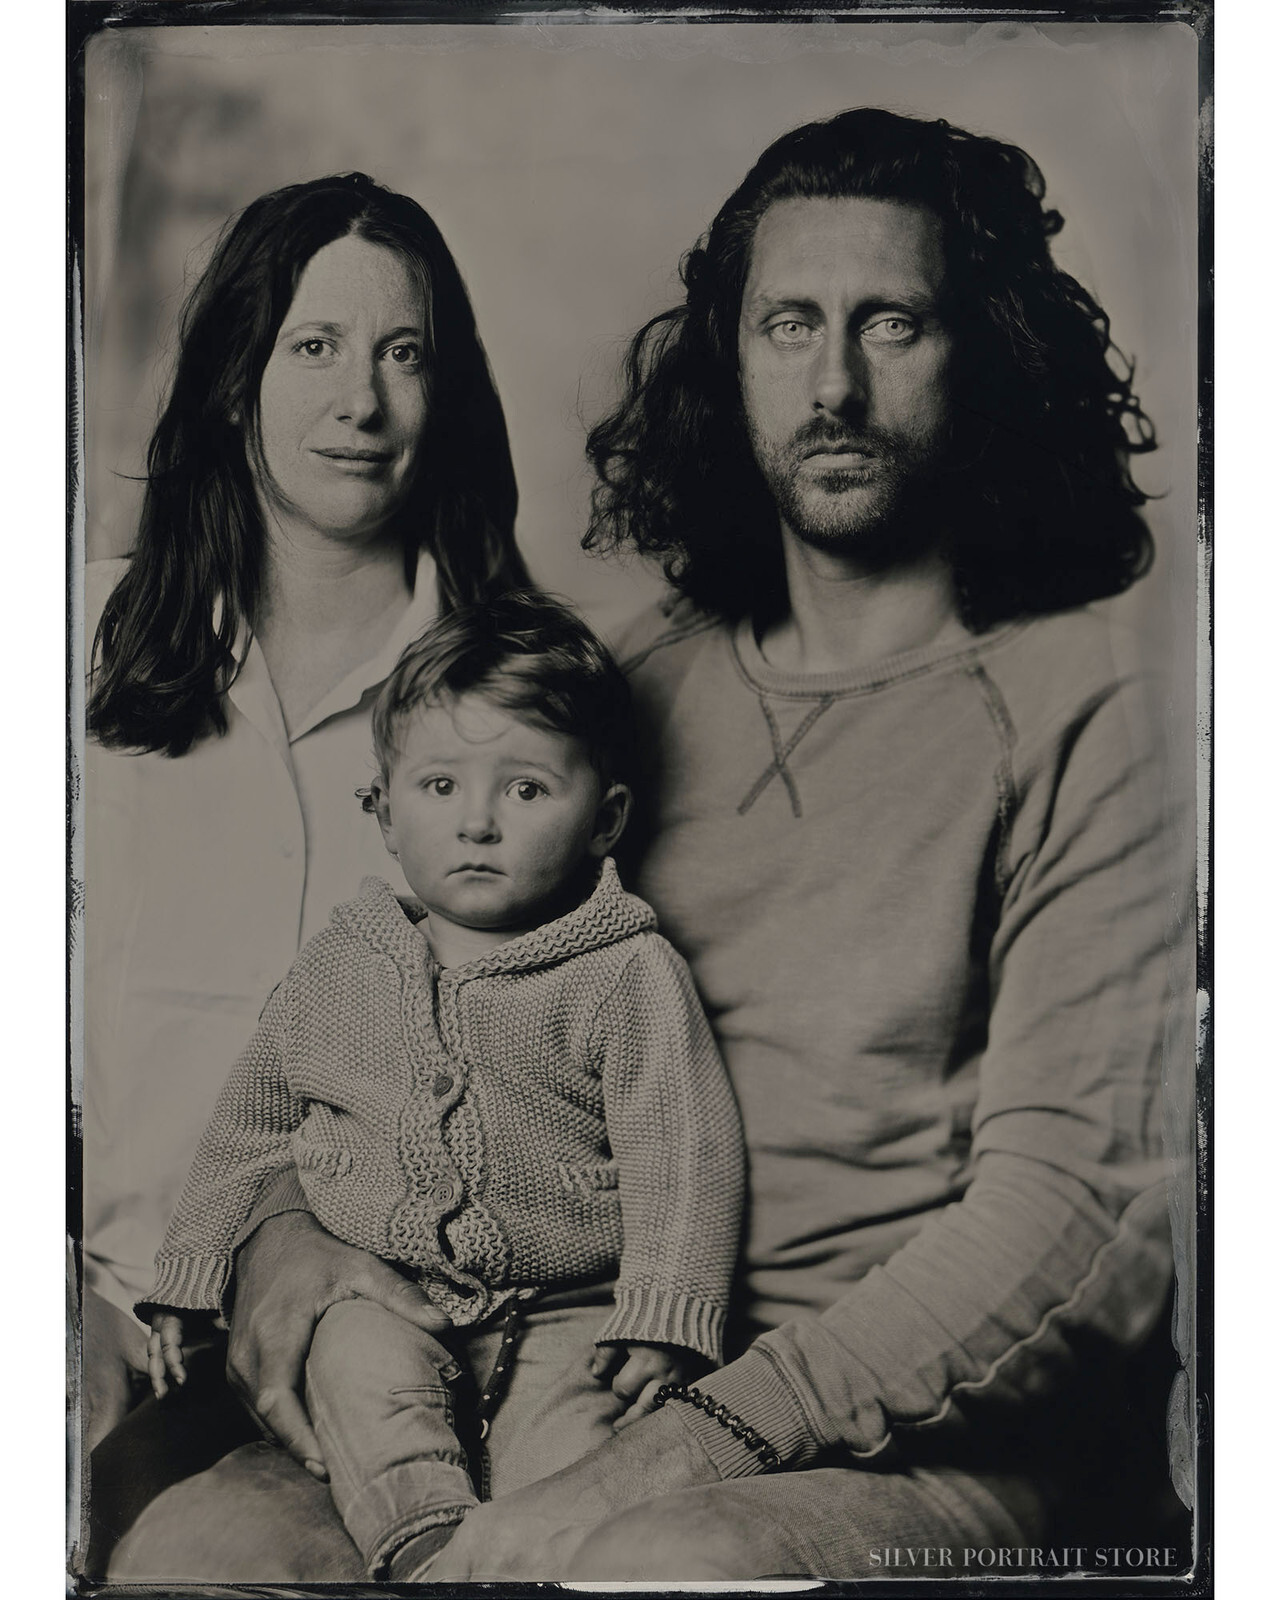 Annouk. Raphaël & Roubie-Silver Portrait Store-scan from Wet plate collodion-Tintype 13 x 18 cm.